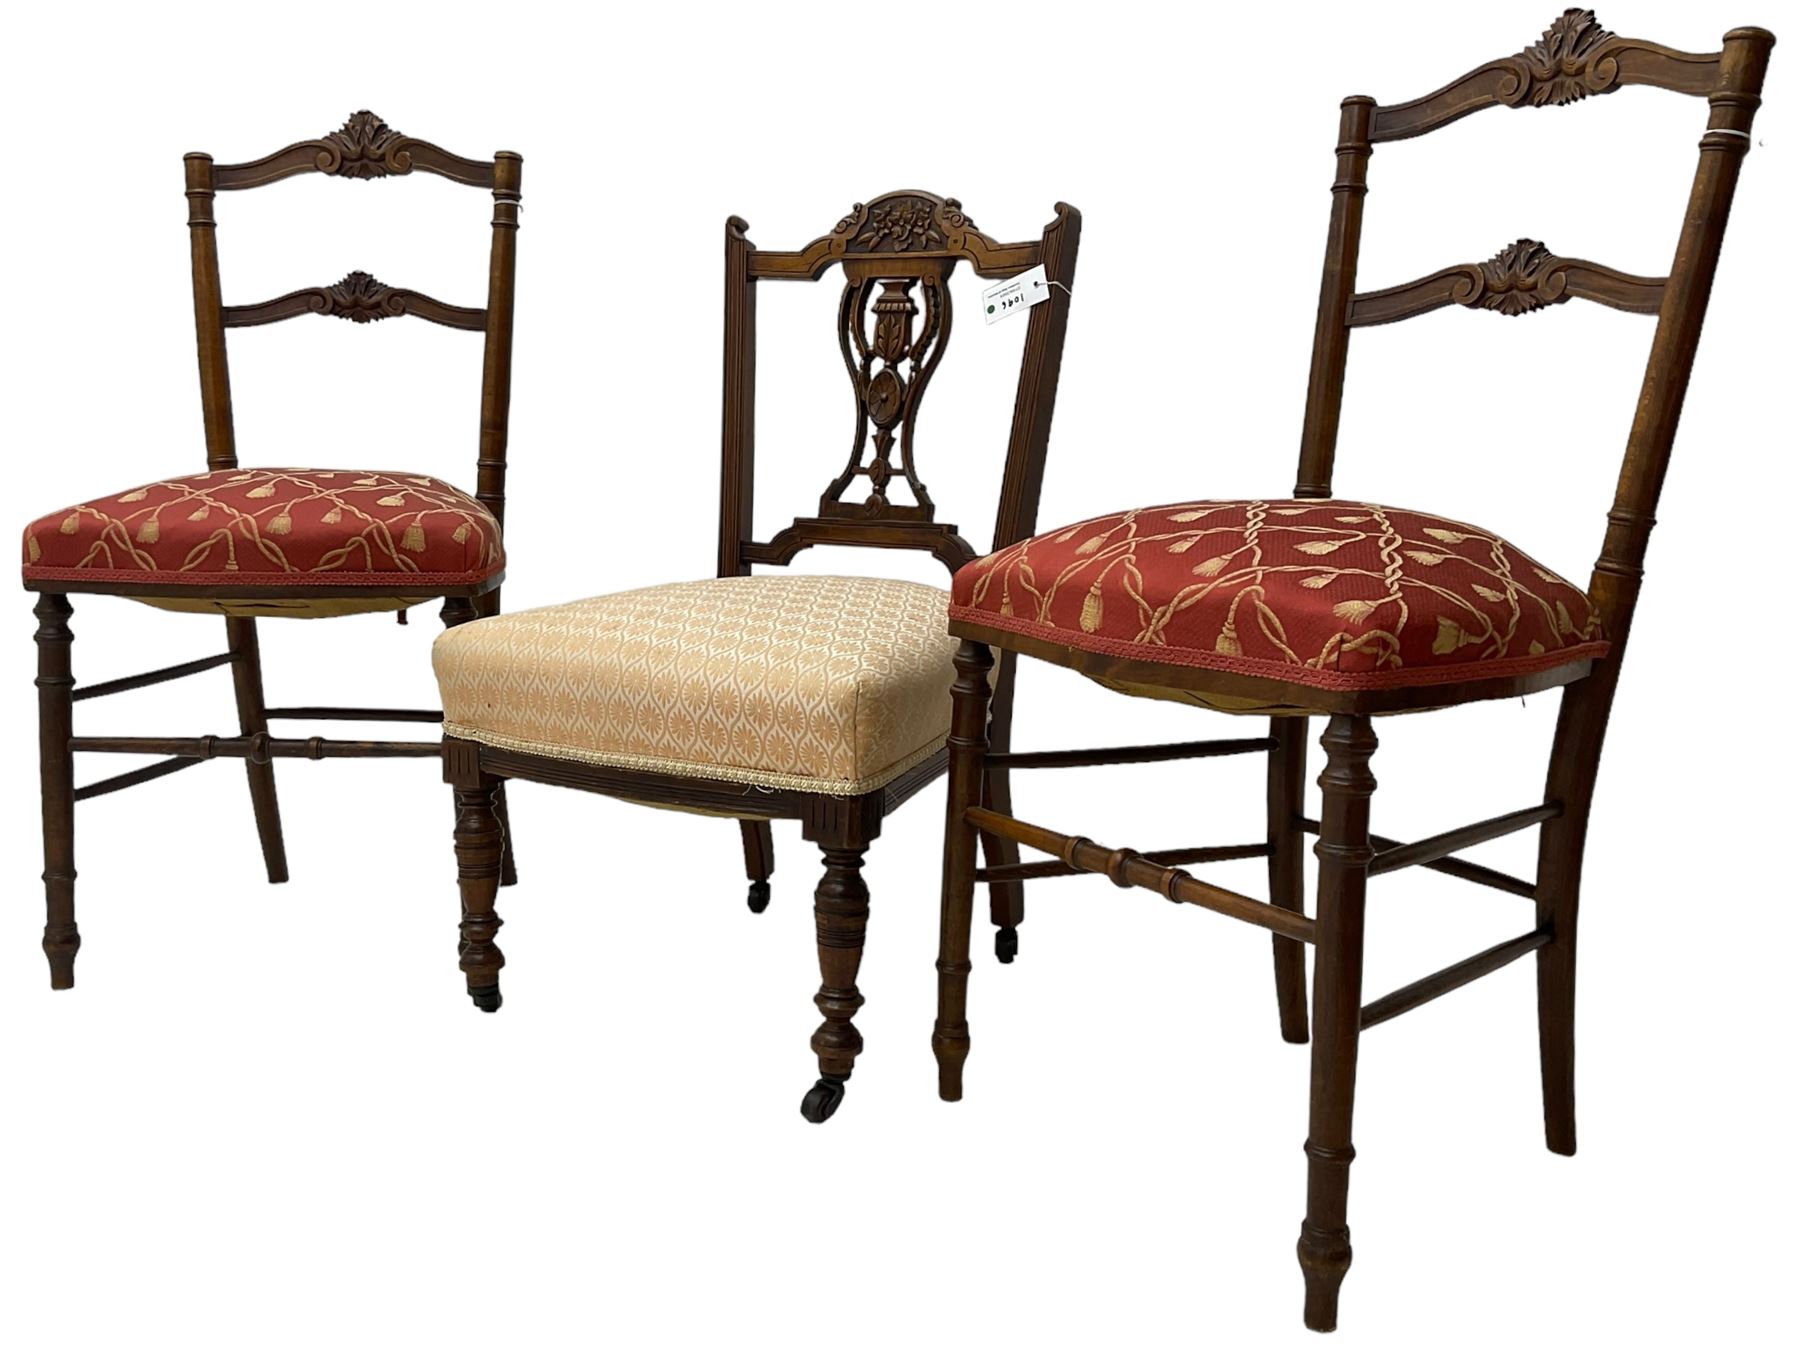 Pair of late 19th century walnut bedroom chairs - Image 3 of 4